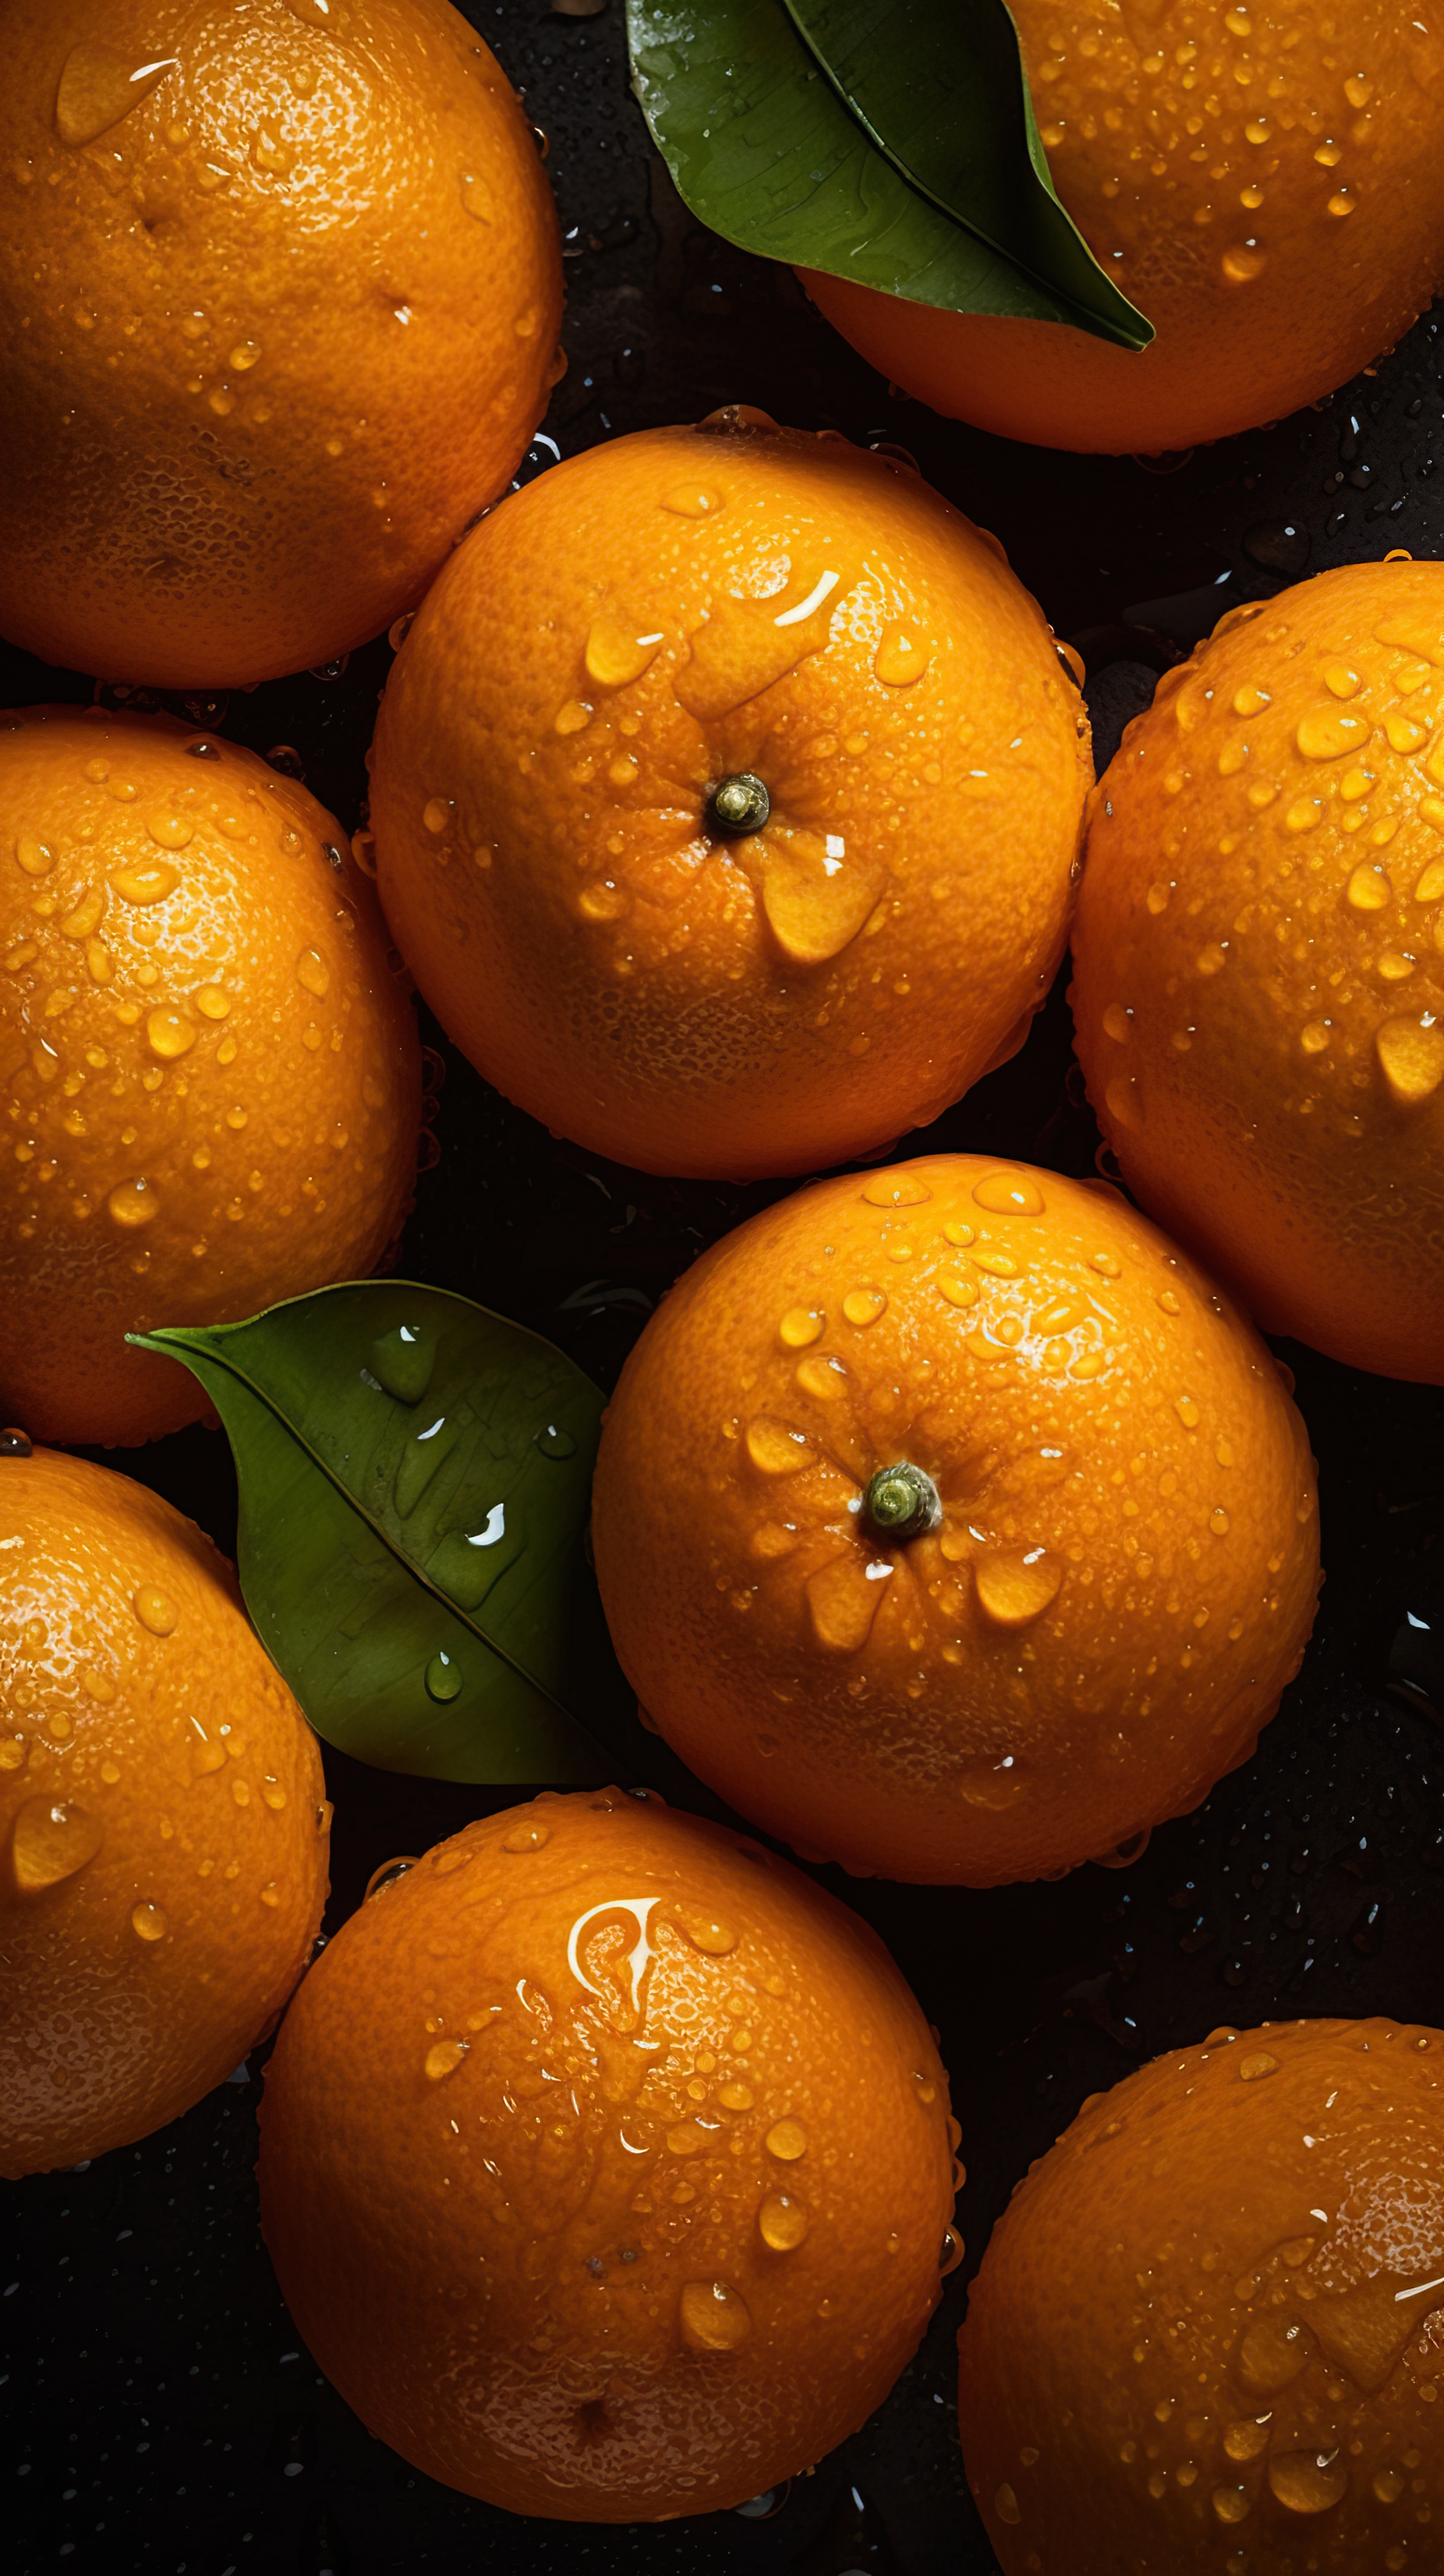 Fresh oranges with droplets on dark background